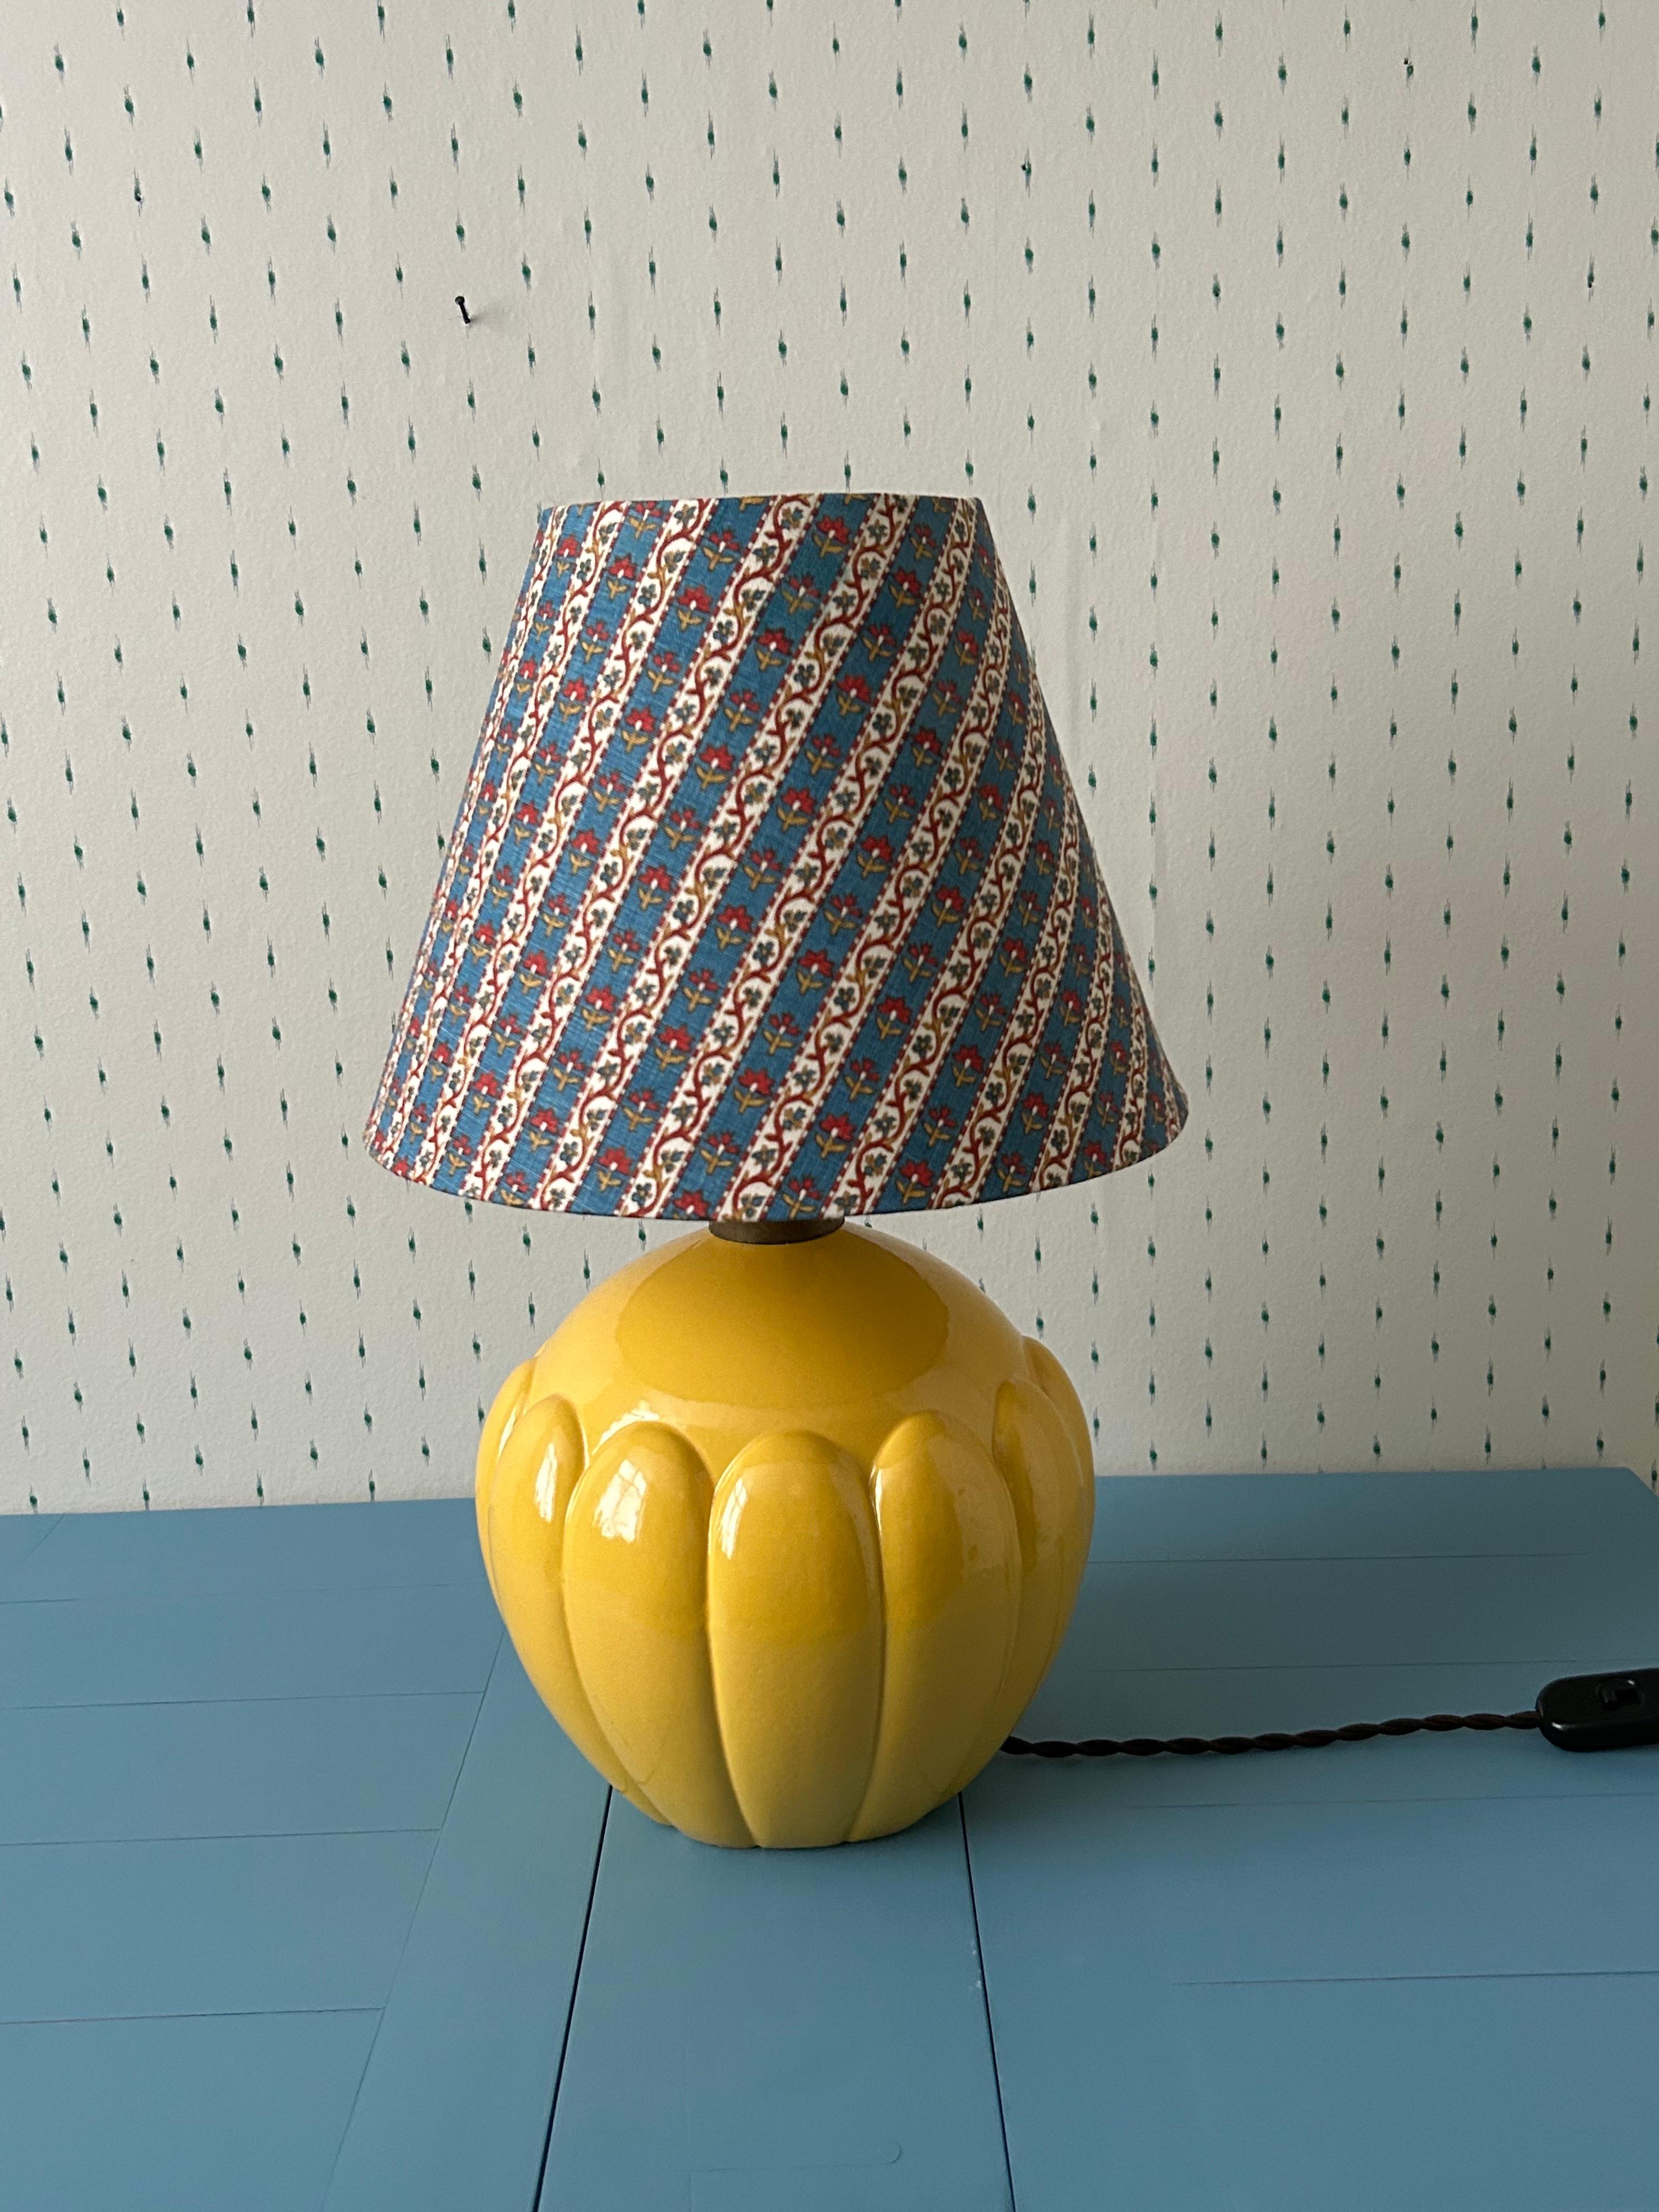 French Vintage Yellow Ceramic Table Lamp with Customized Striped Shade, France, 1960s For Sale